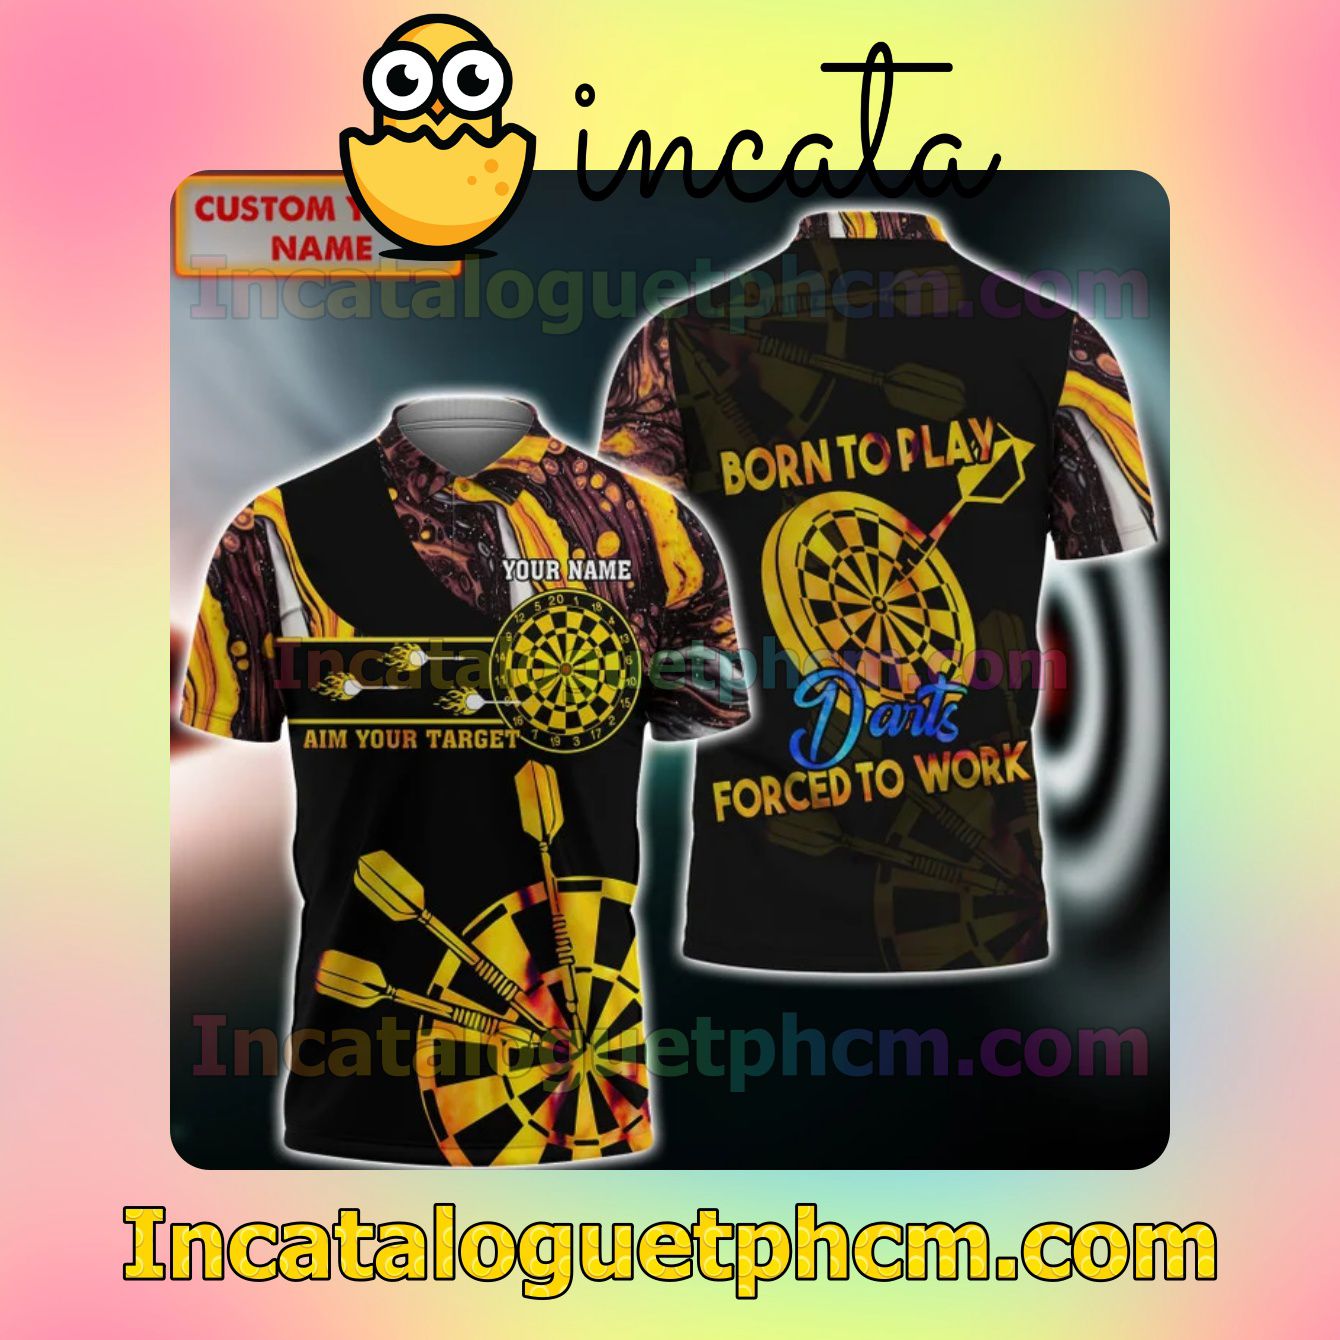 Personalized Born To Play Darts Forced To Work Aim Your Target Polo Gift For Men Dad